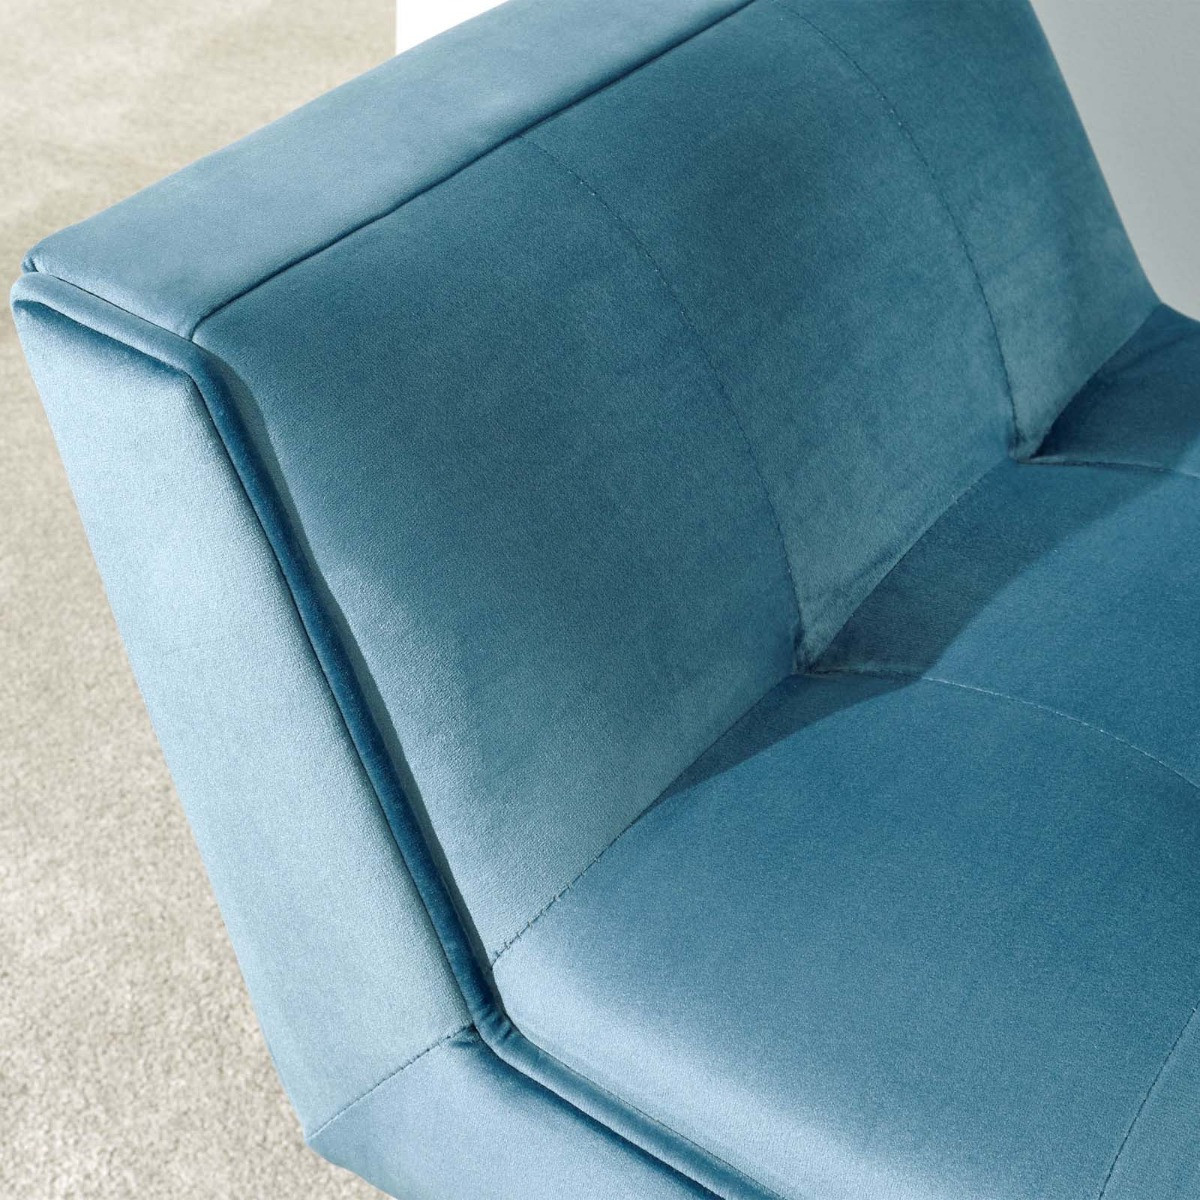 Turin Upholstered Window Seat - Teal>